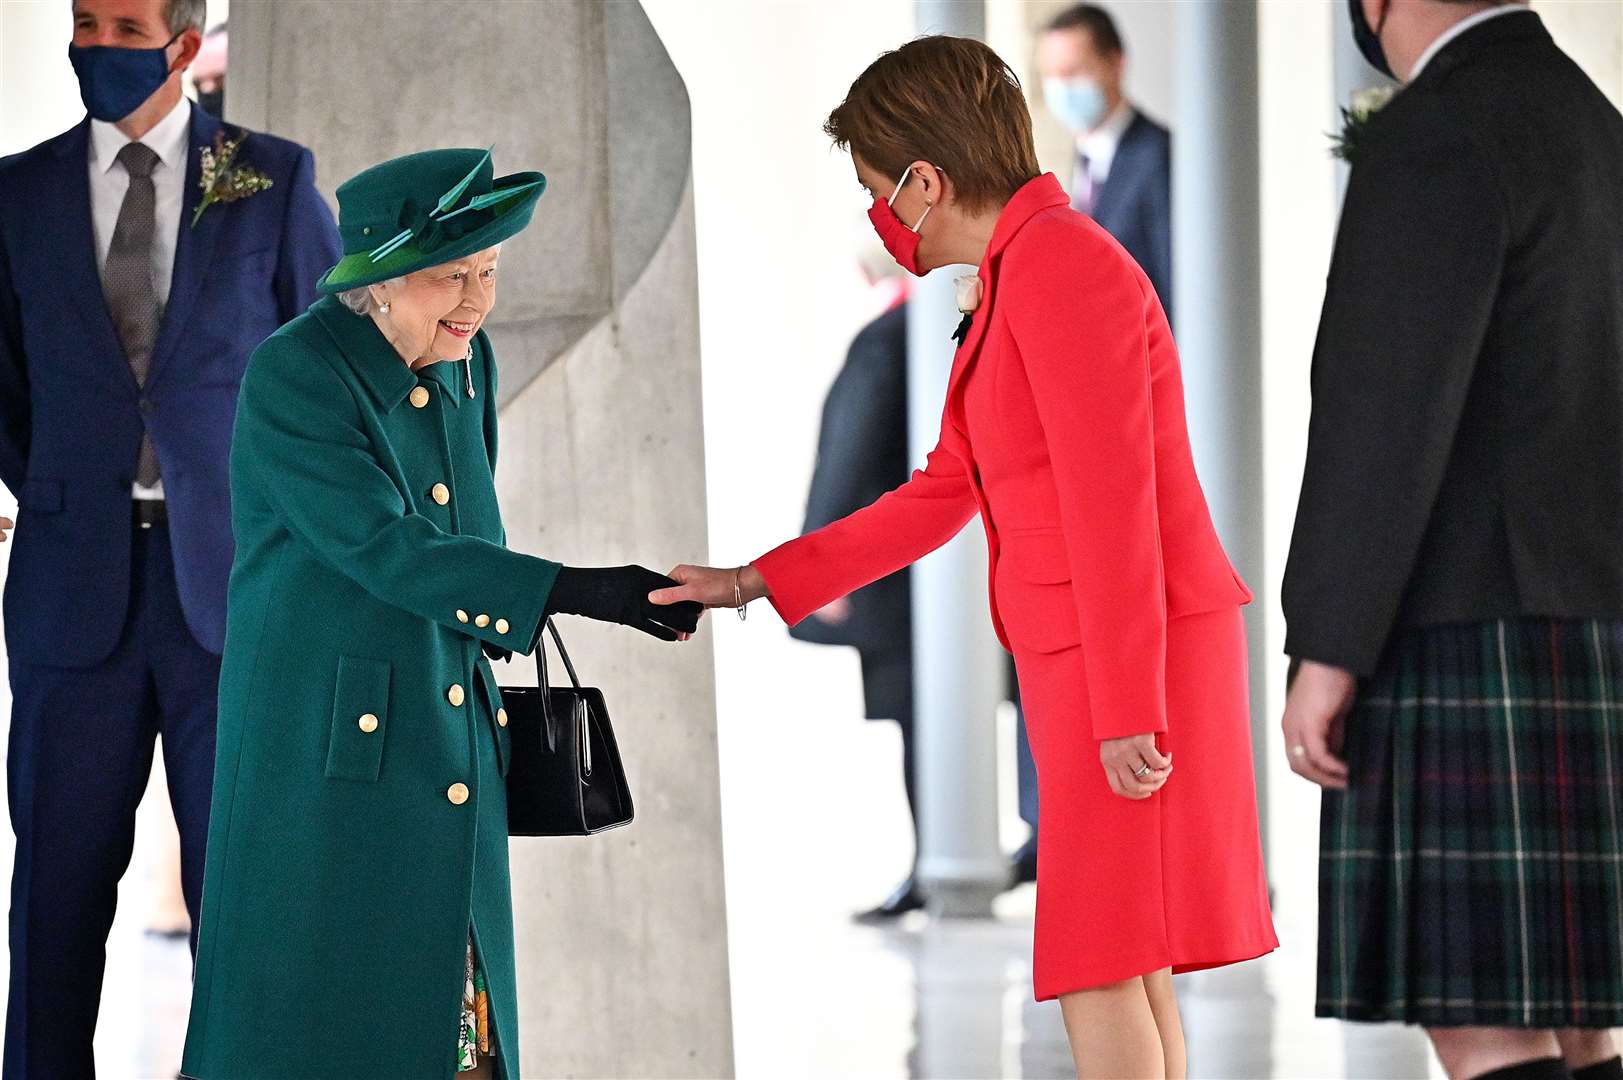 The Queen was at the Scottish Parliament earlier this month (Jeff J Mitchell/PA)